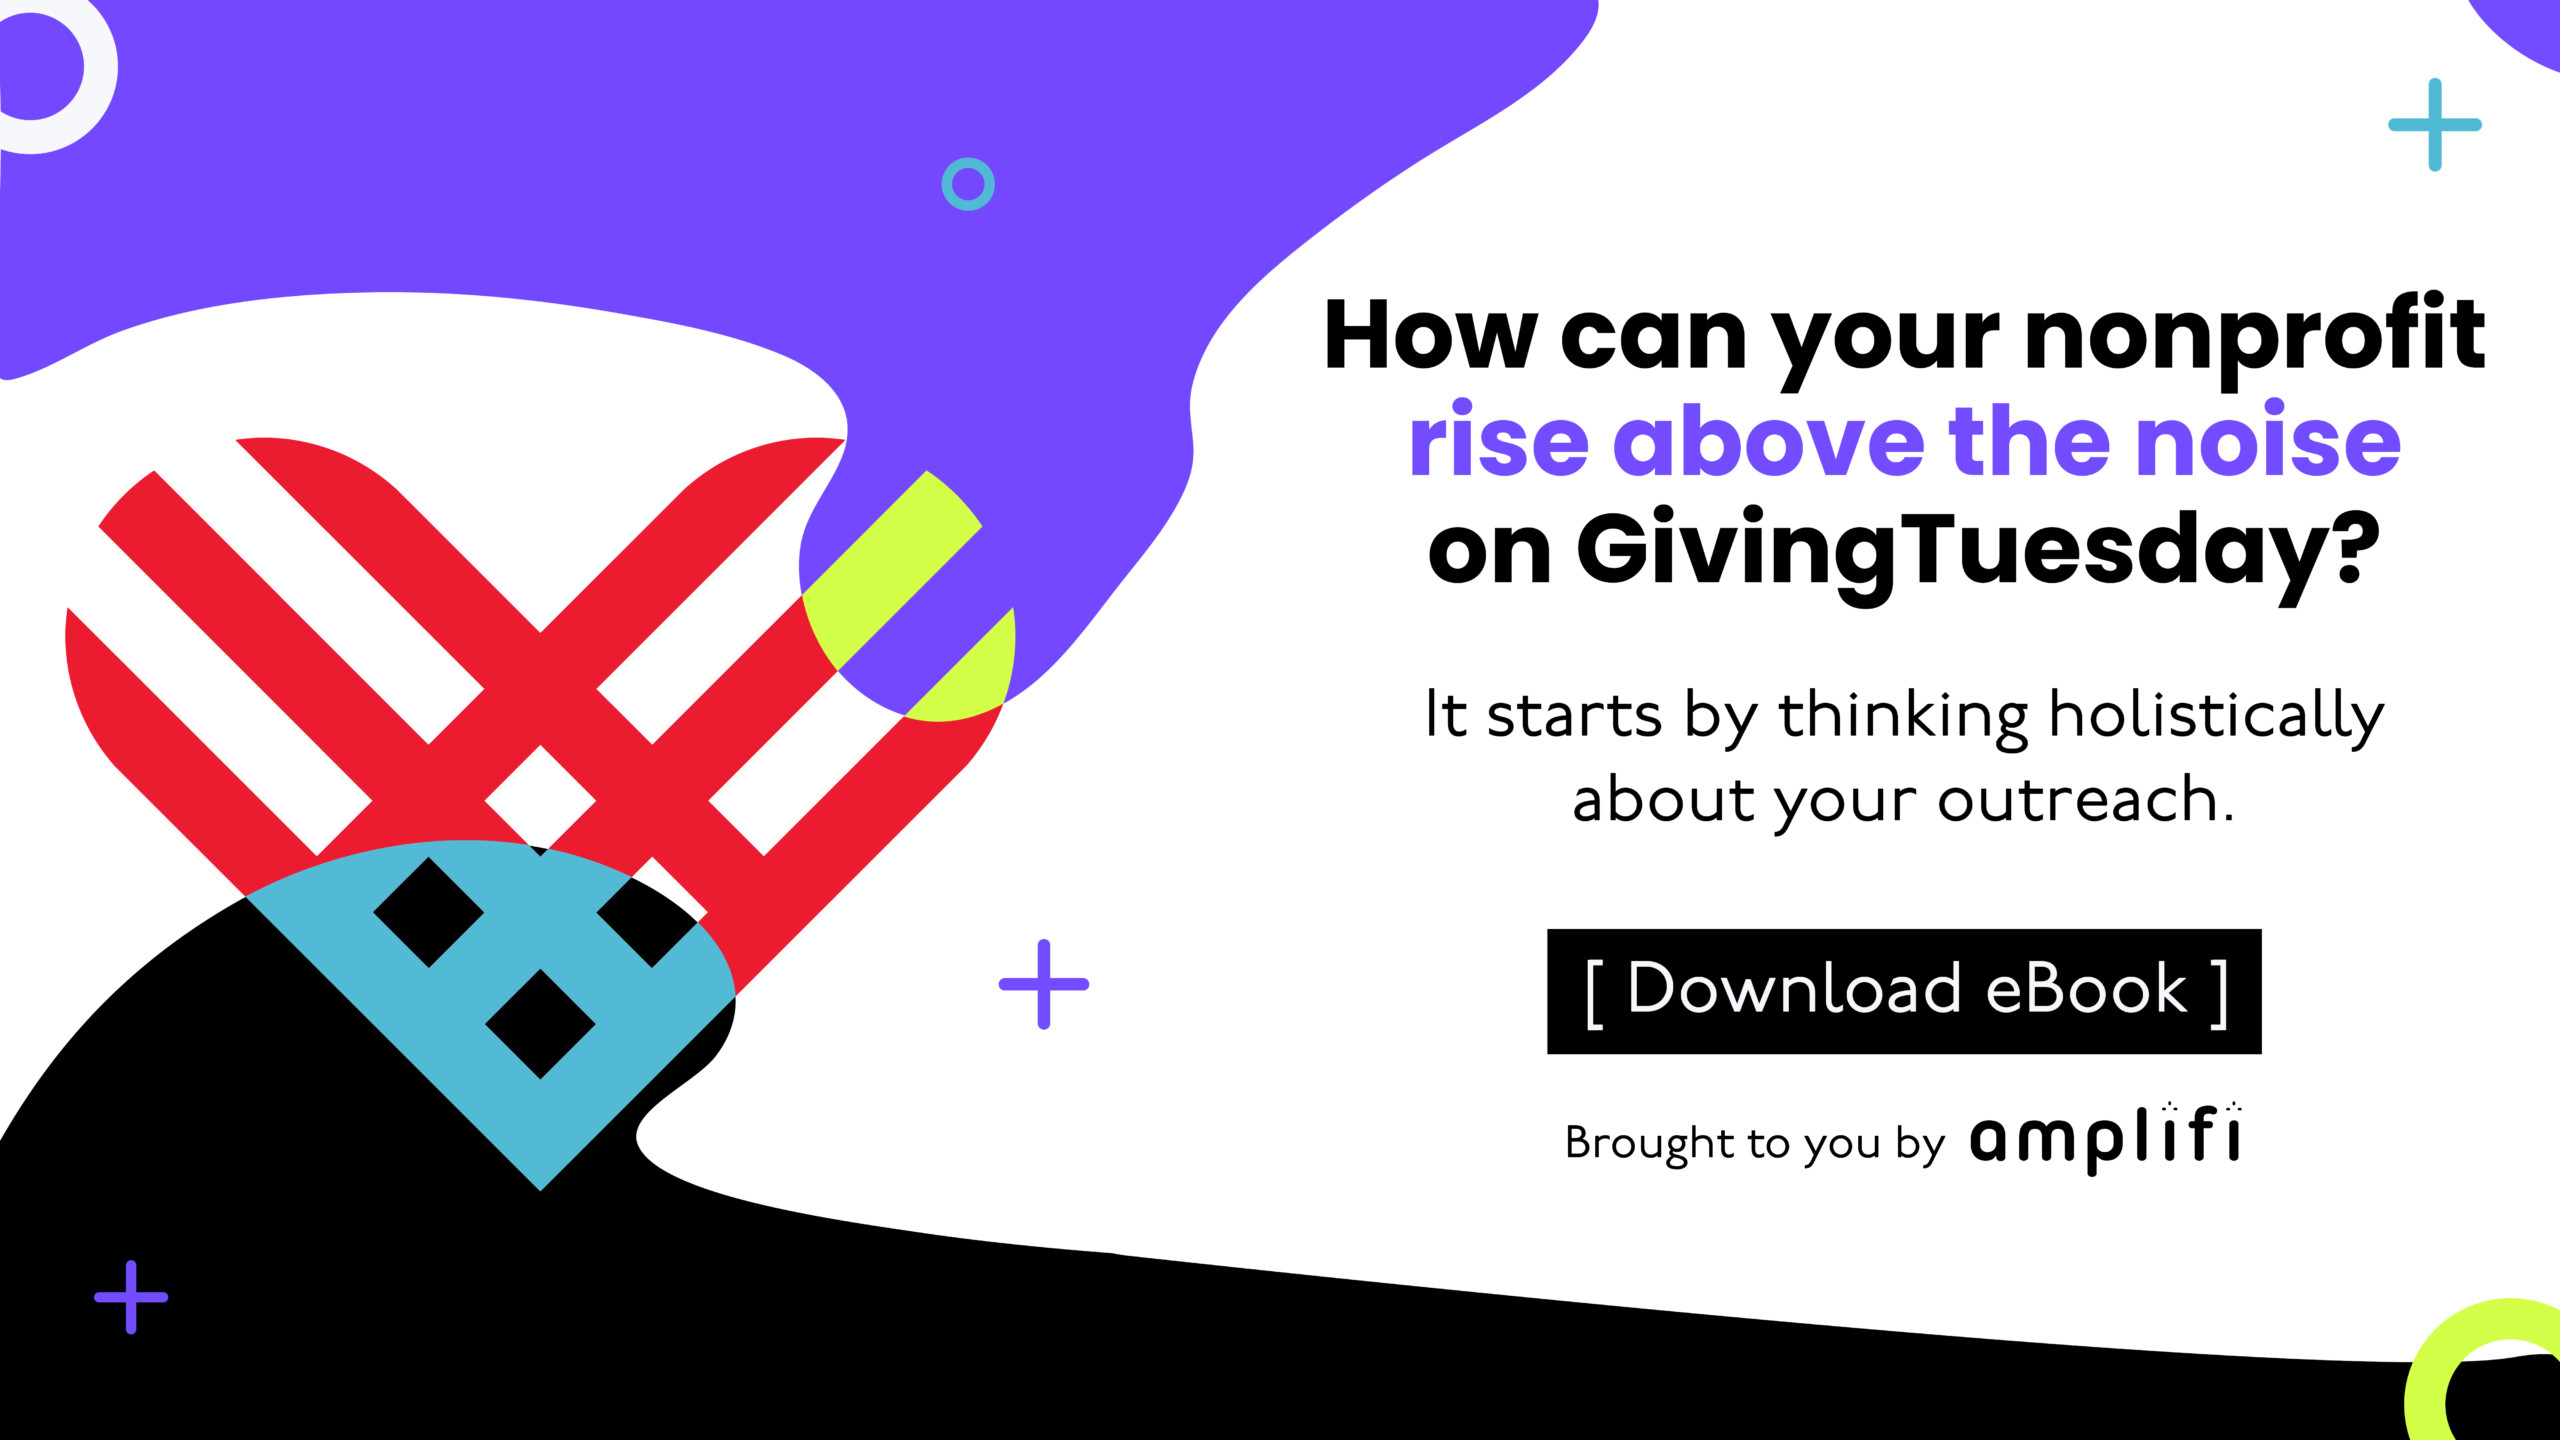 FREE eBOOK: GivingTuesday - Your nonprofit's holistic approach